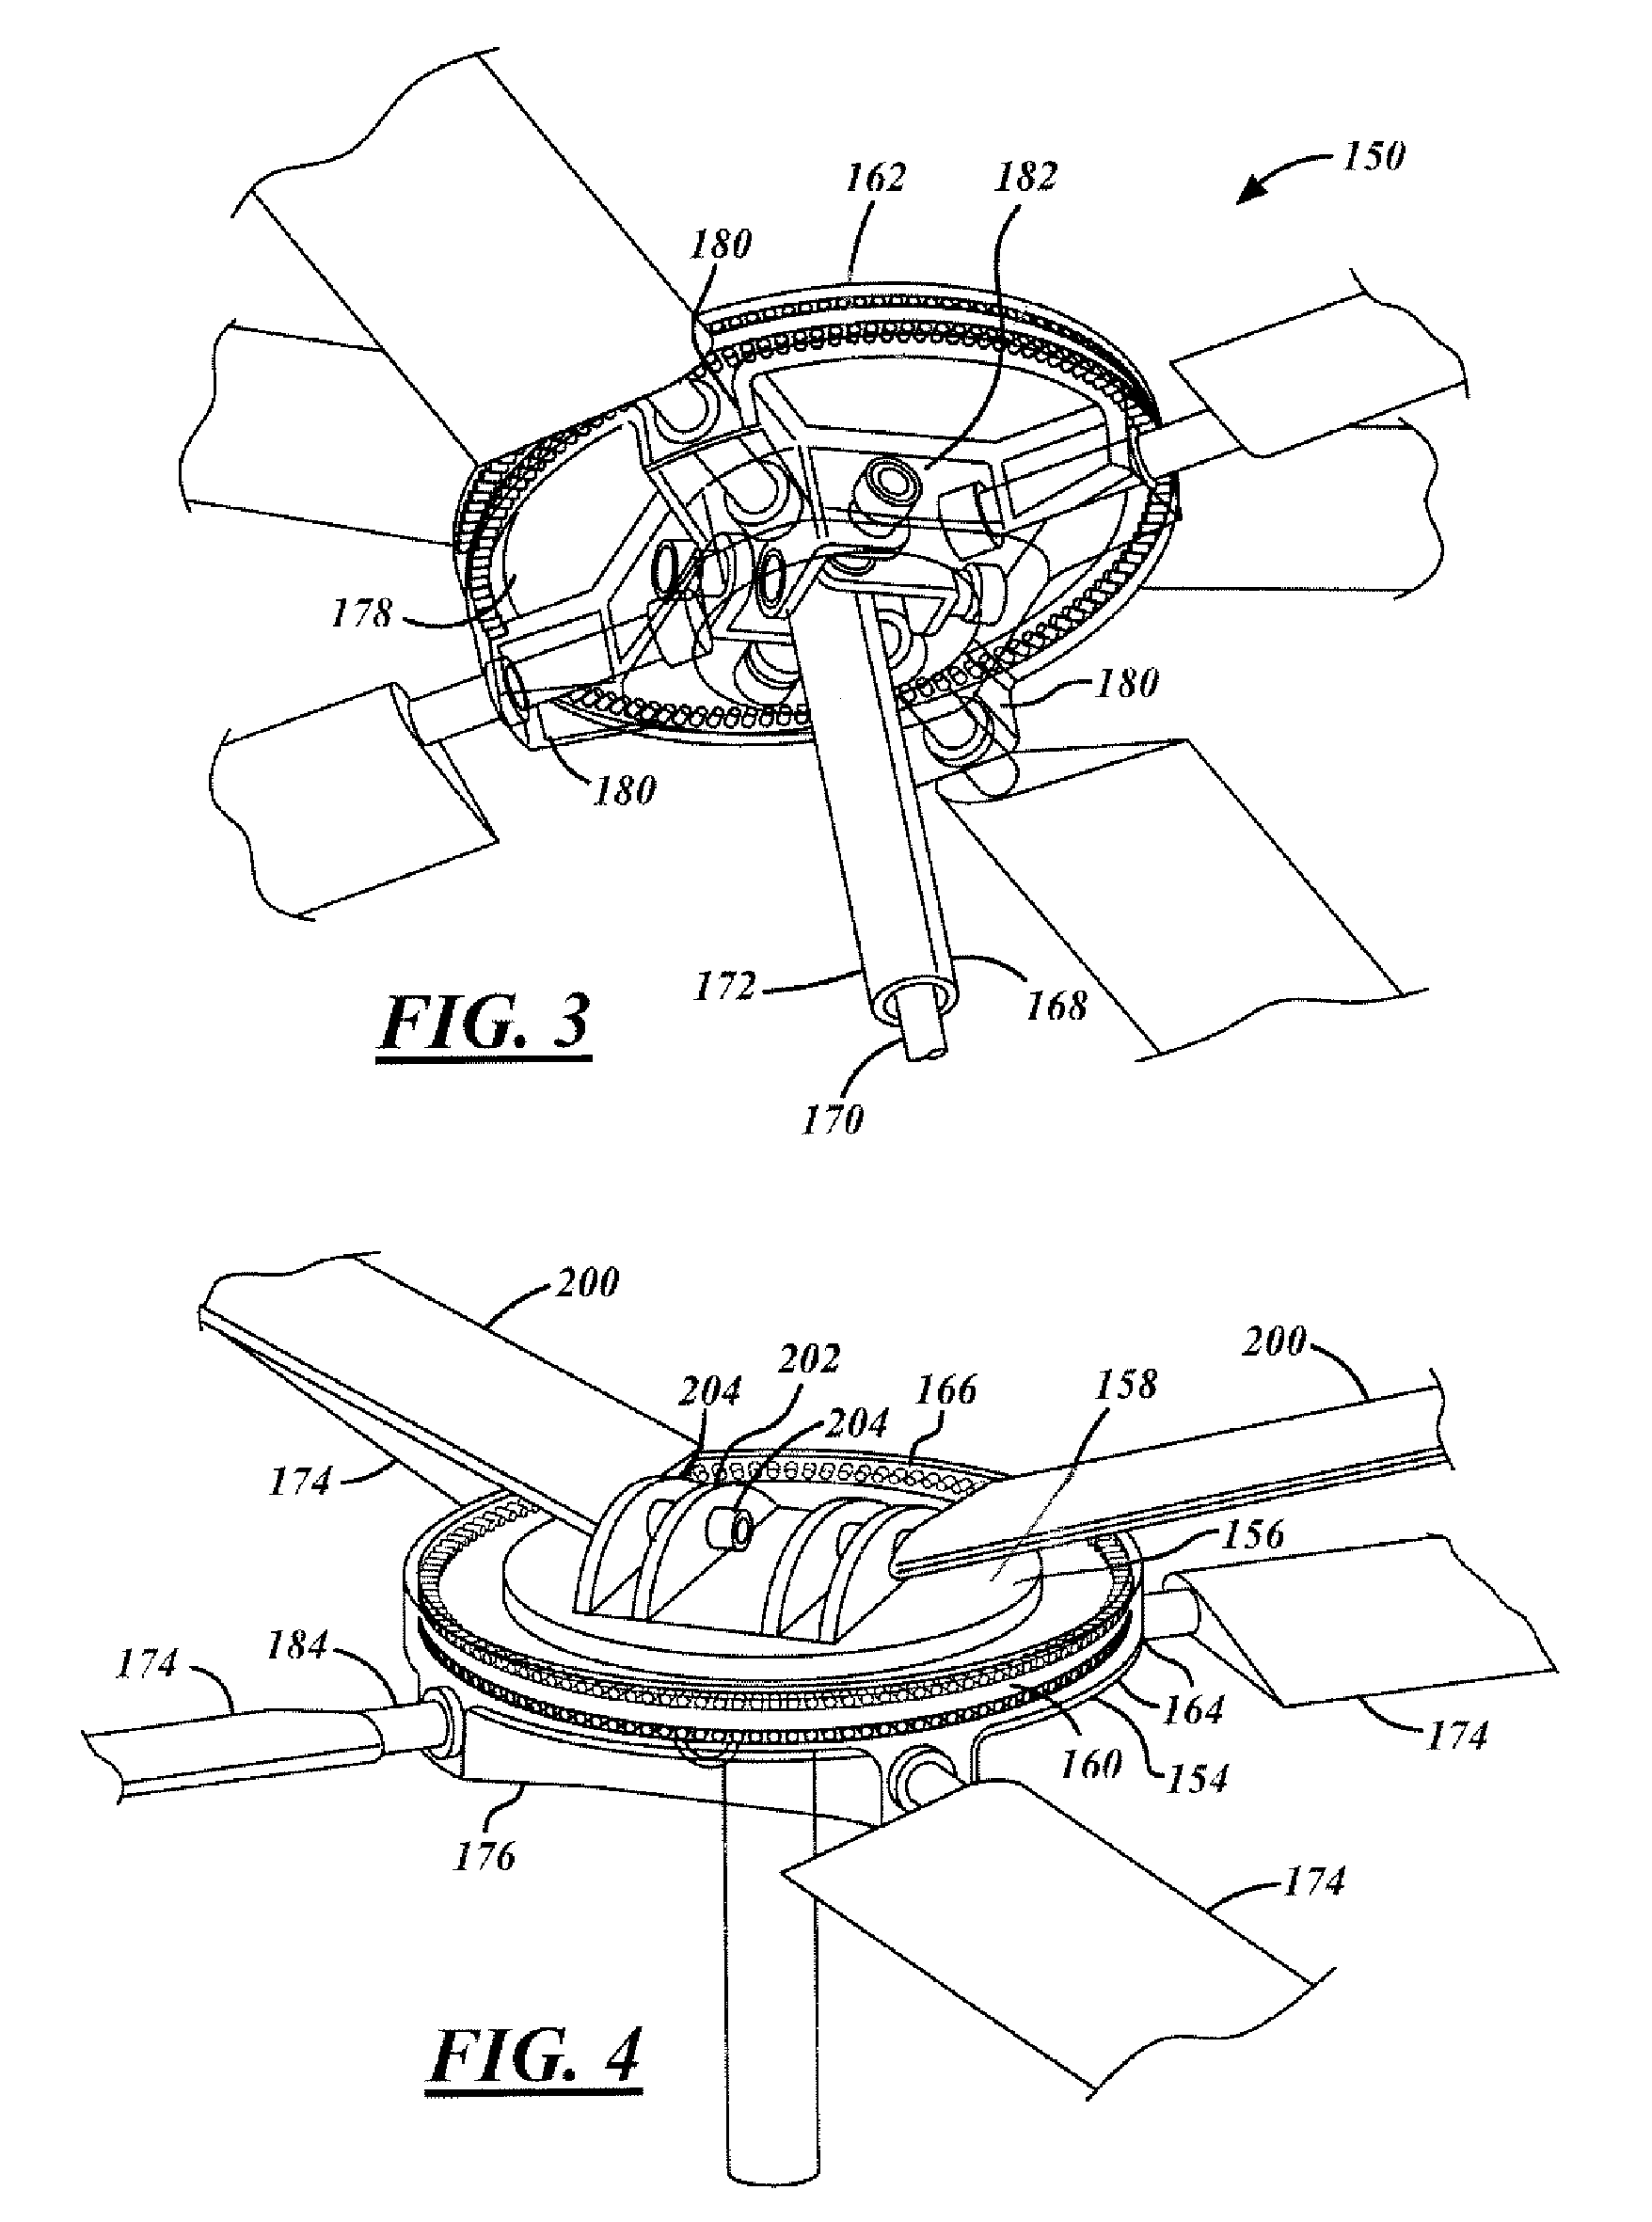 Unloaded lift offset rotor system for a helicopter